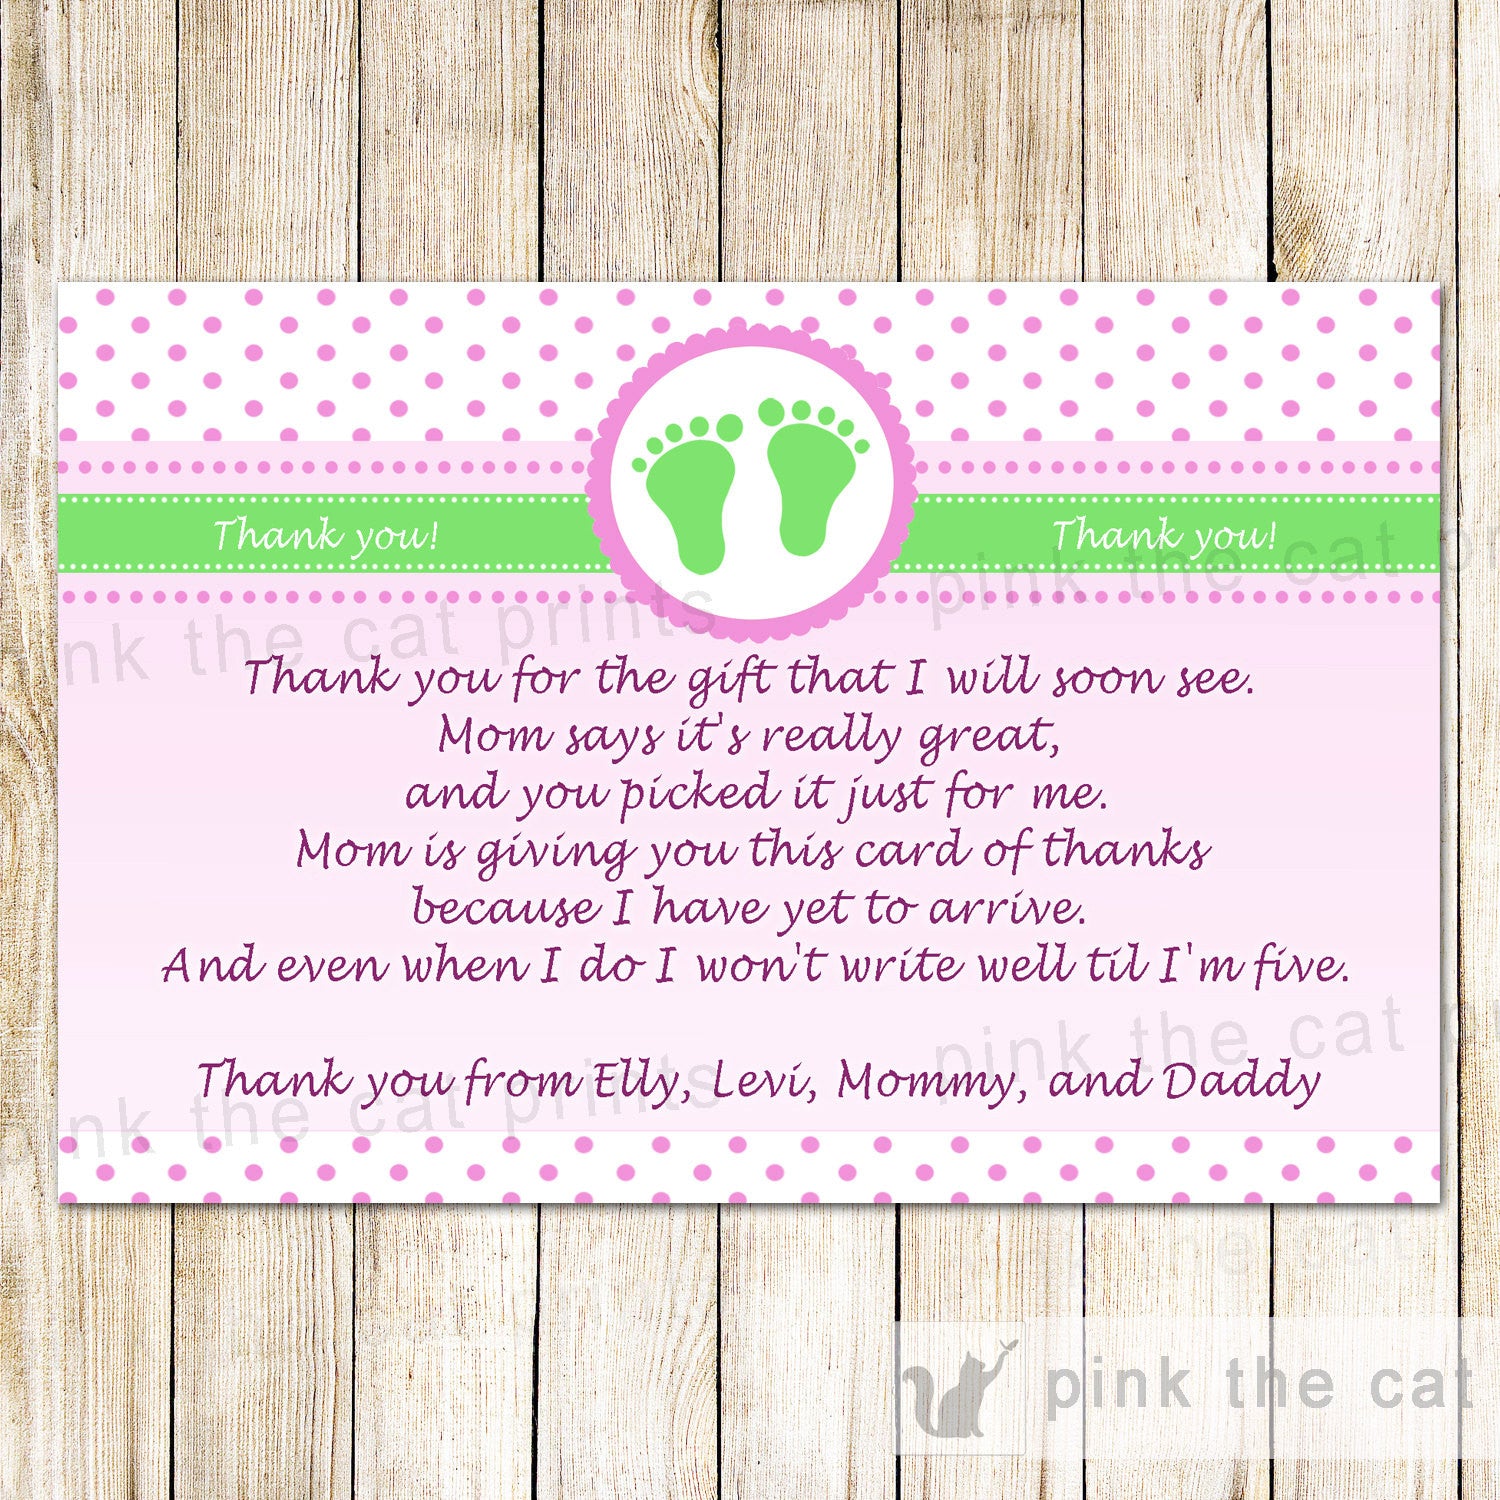 Green Baby Shower Note - Polka Dots Baby Feet Greeting – Pink the Cat